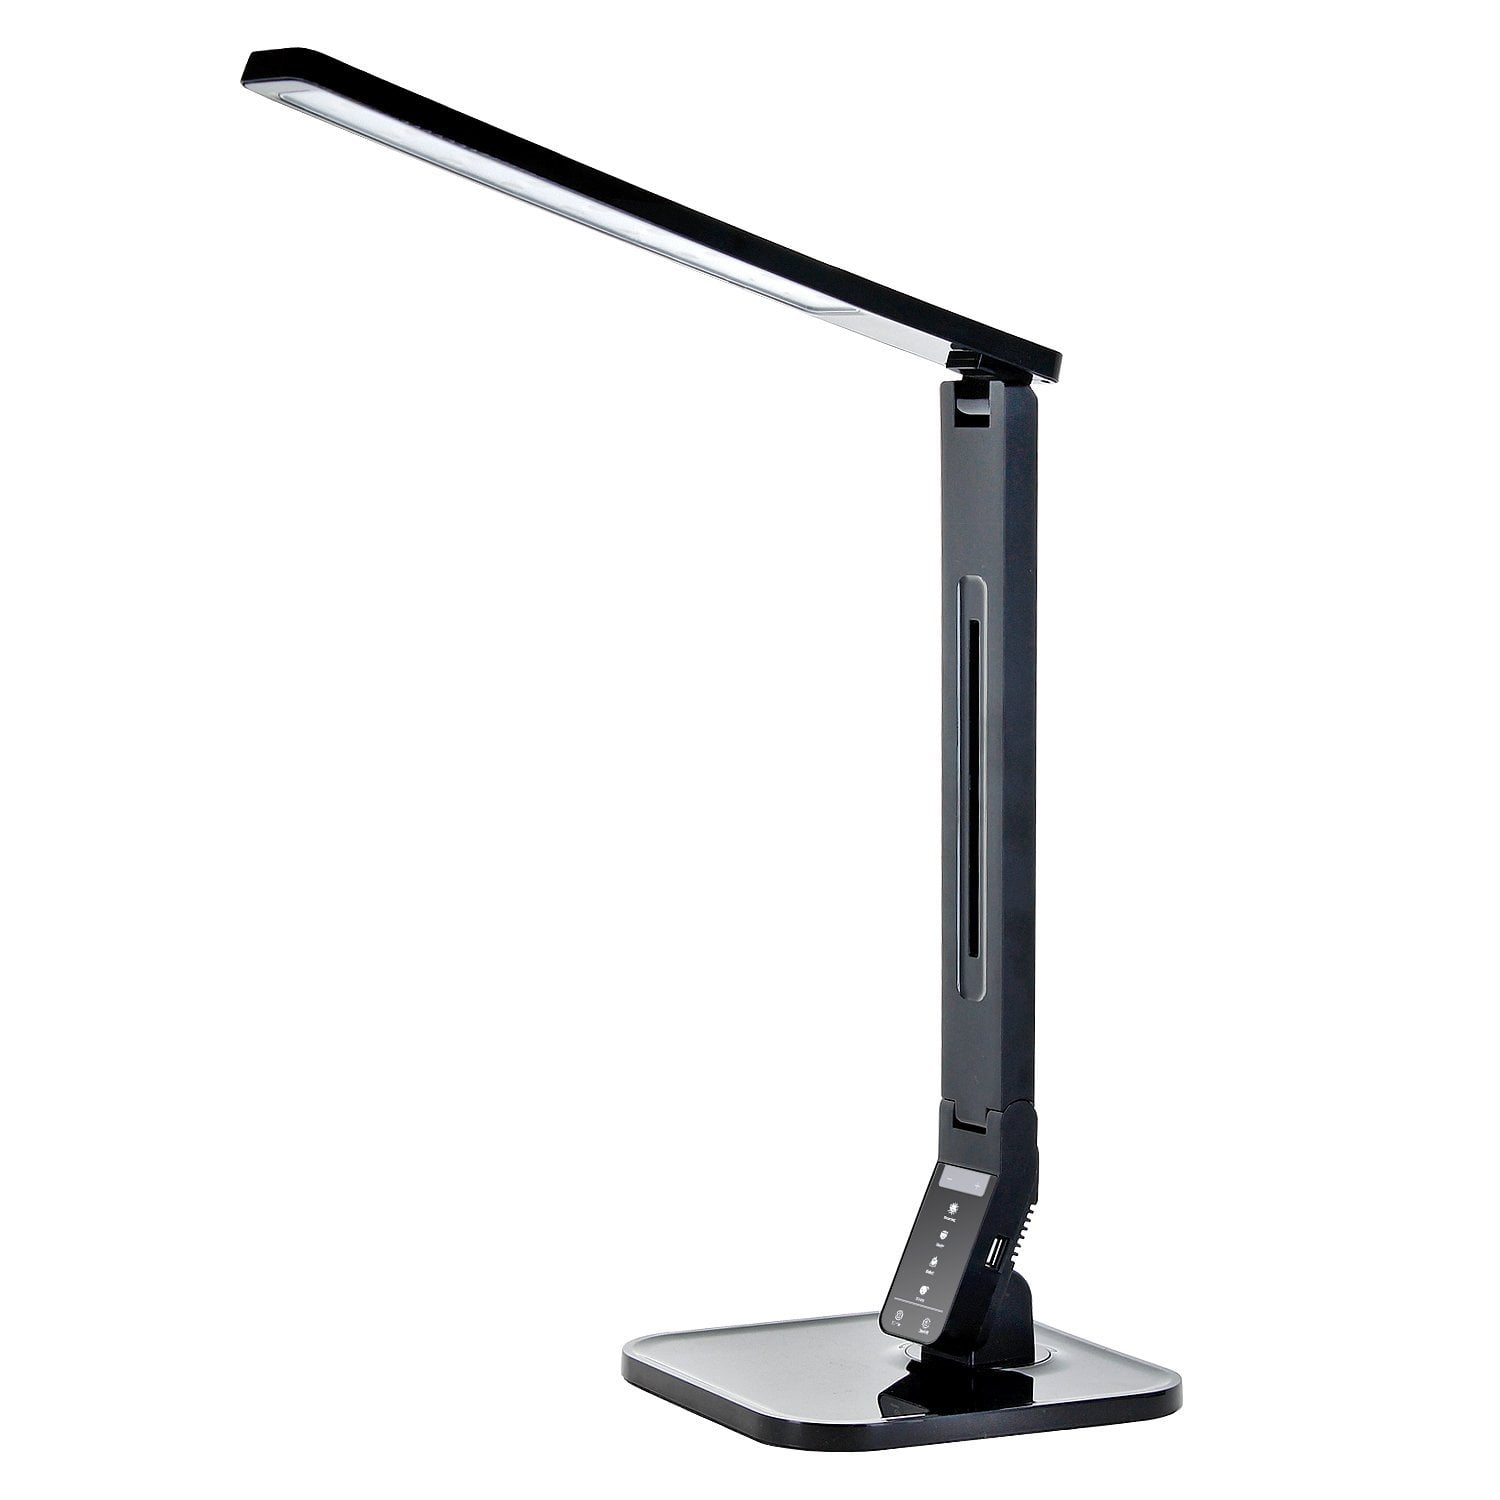 Tenergy 11w Dimmable Led Desk Lamp With, Led Desk Lamp Usb Charging